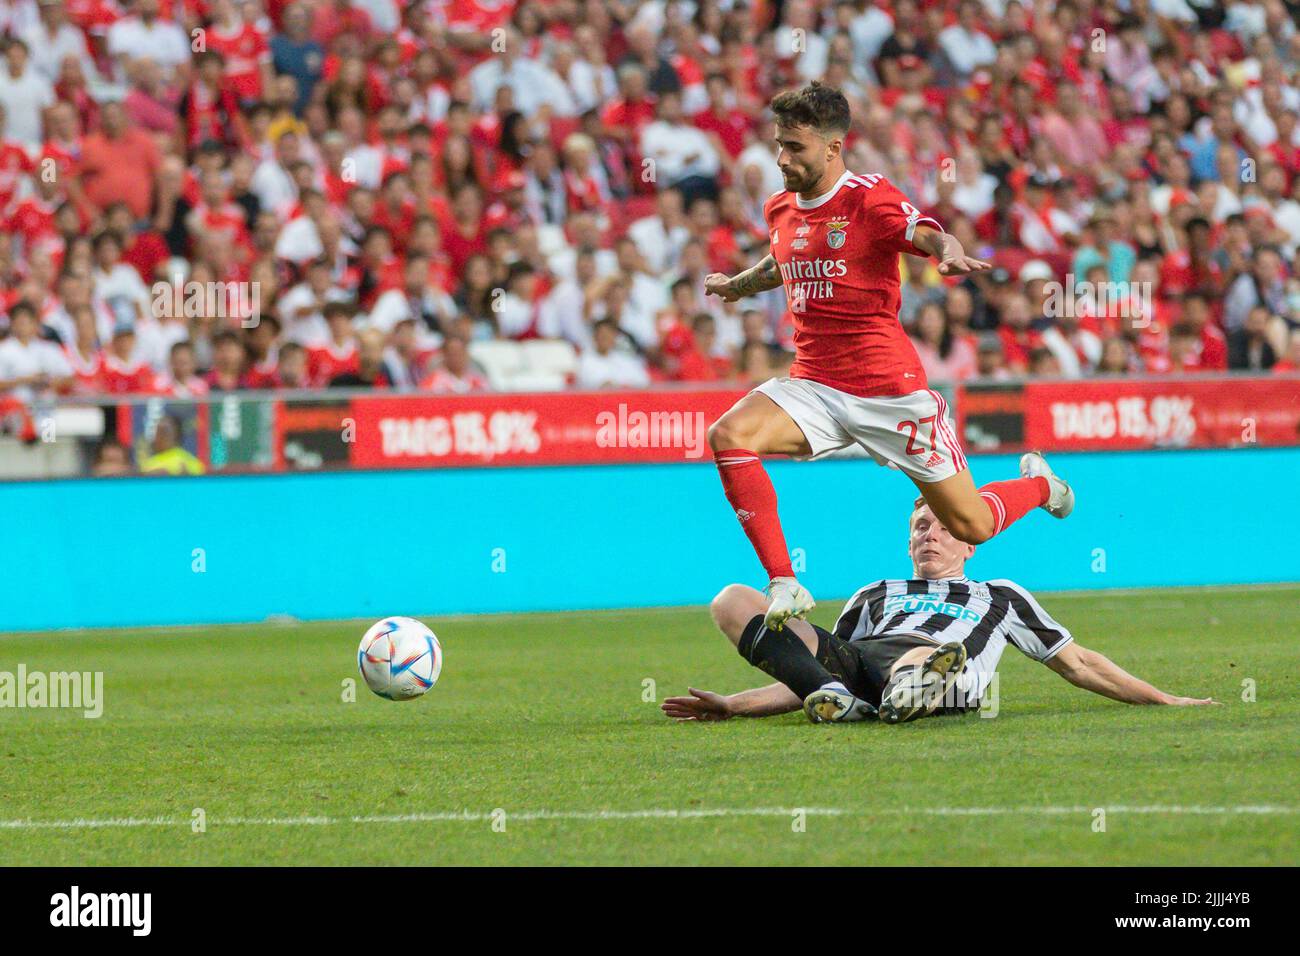 Lisbon, Portugal. July 26, 2022.  Benfica's forward from Portugal Rafa Silva (27) in action during the friendly game between SL Benfica vs Newcastle United FC Credit: Alexandre de Sousa/Alamy Live News Stock Photo